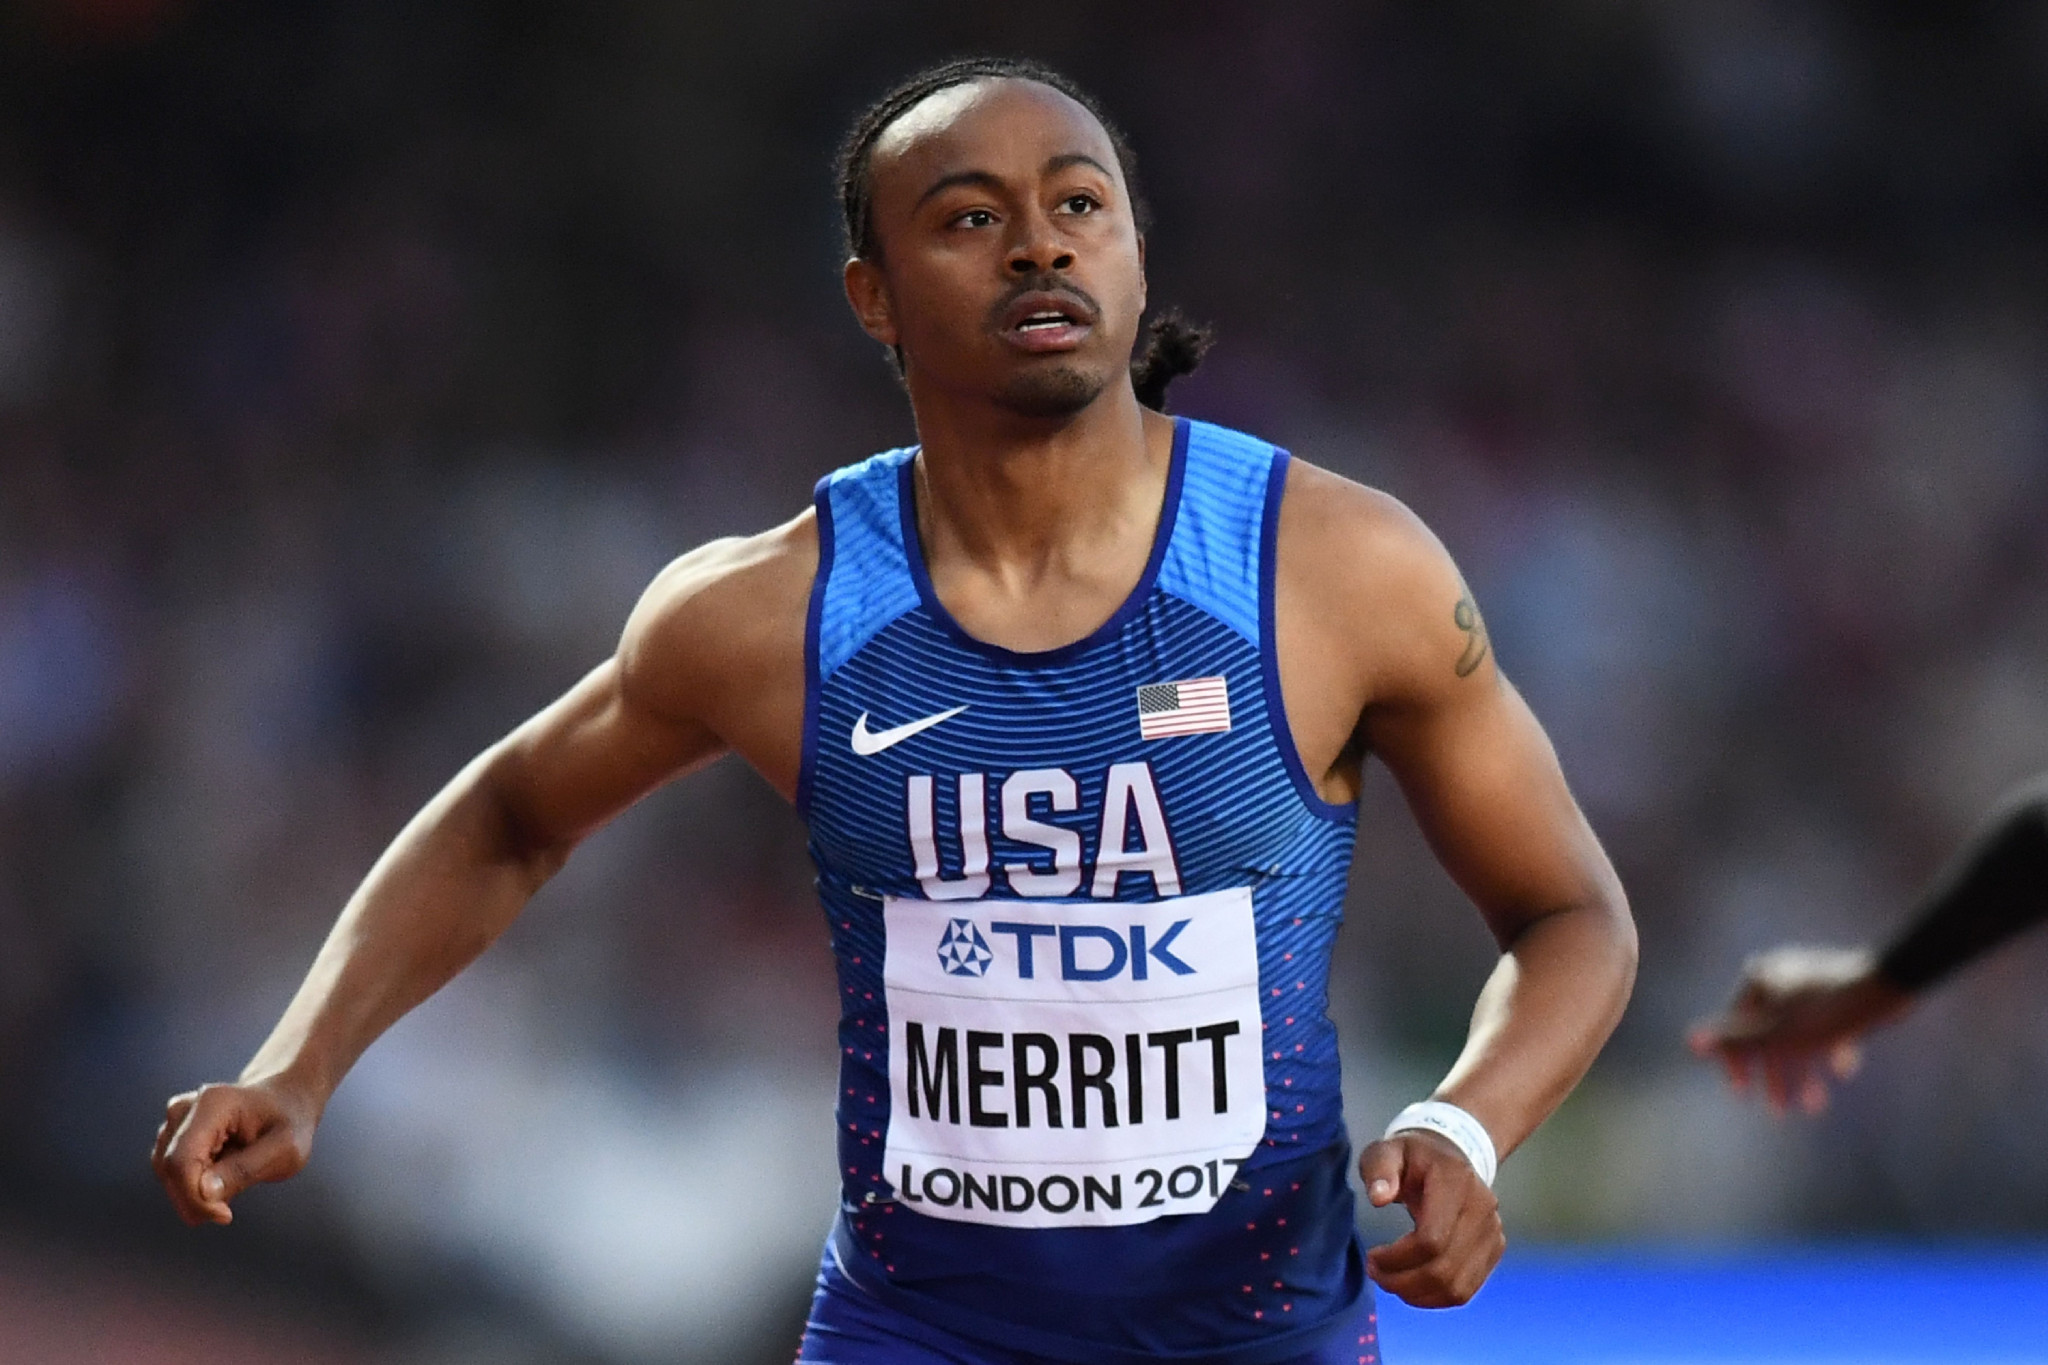 Aries Merritt aims to retire in 2022 after the next World Championships ©Getty Images